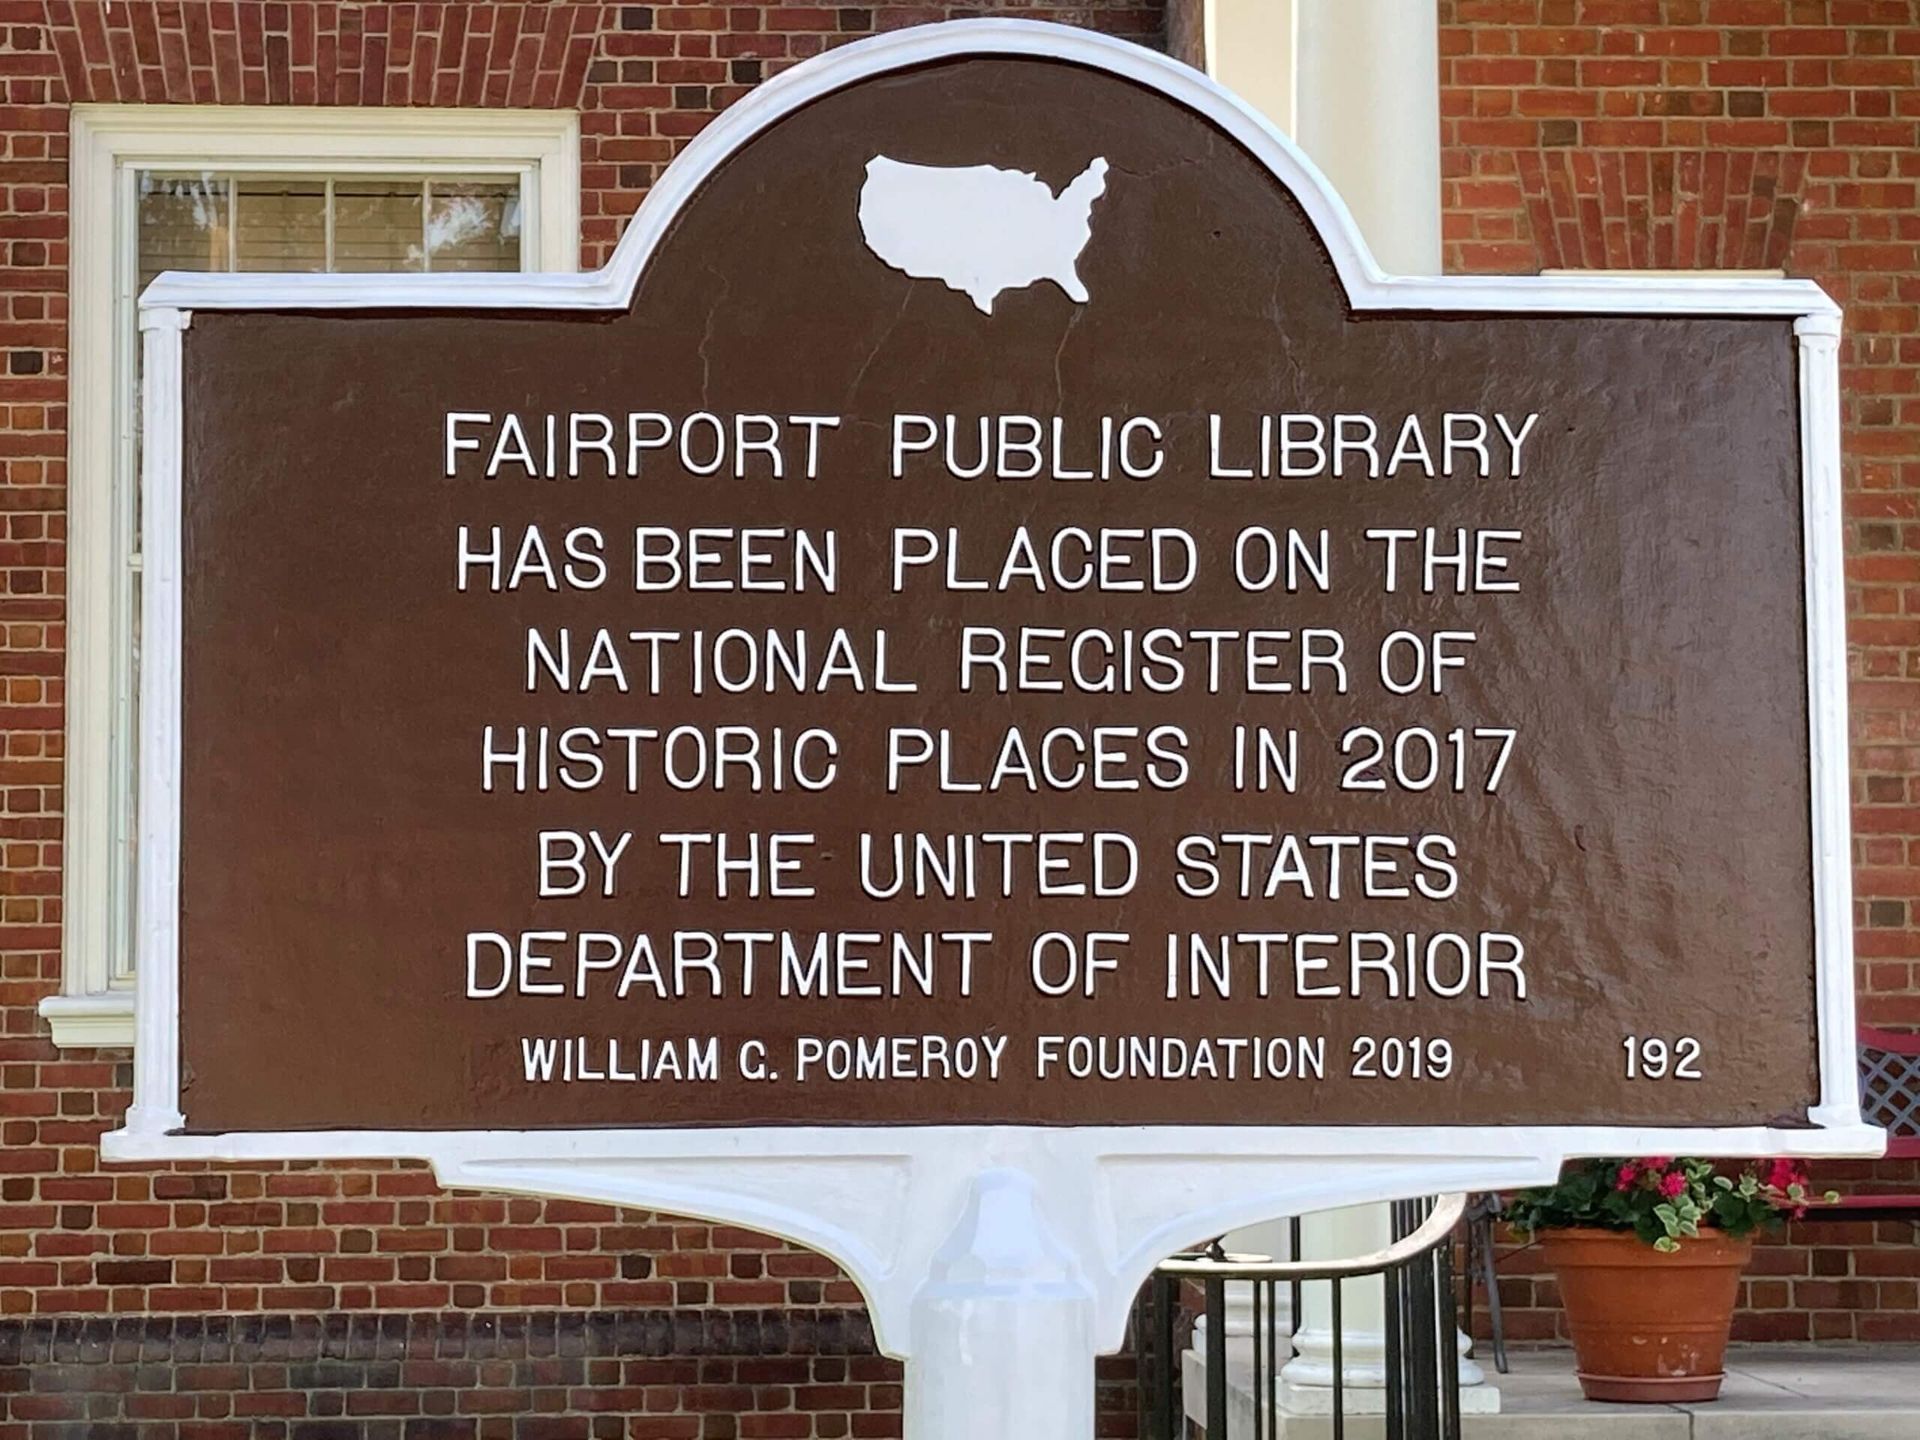 a sign that says fairport public library has been placed on the national register of historic places in 2017 by the united states department of interior